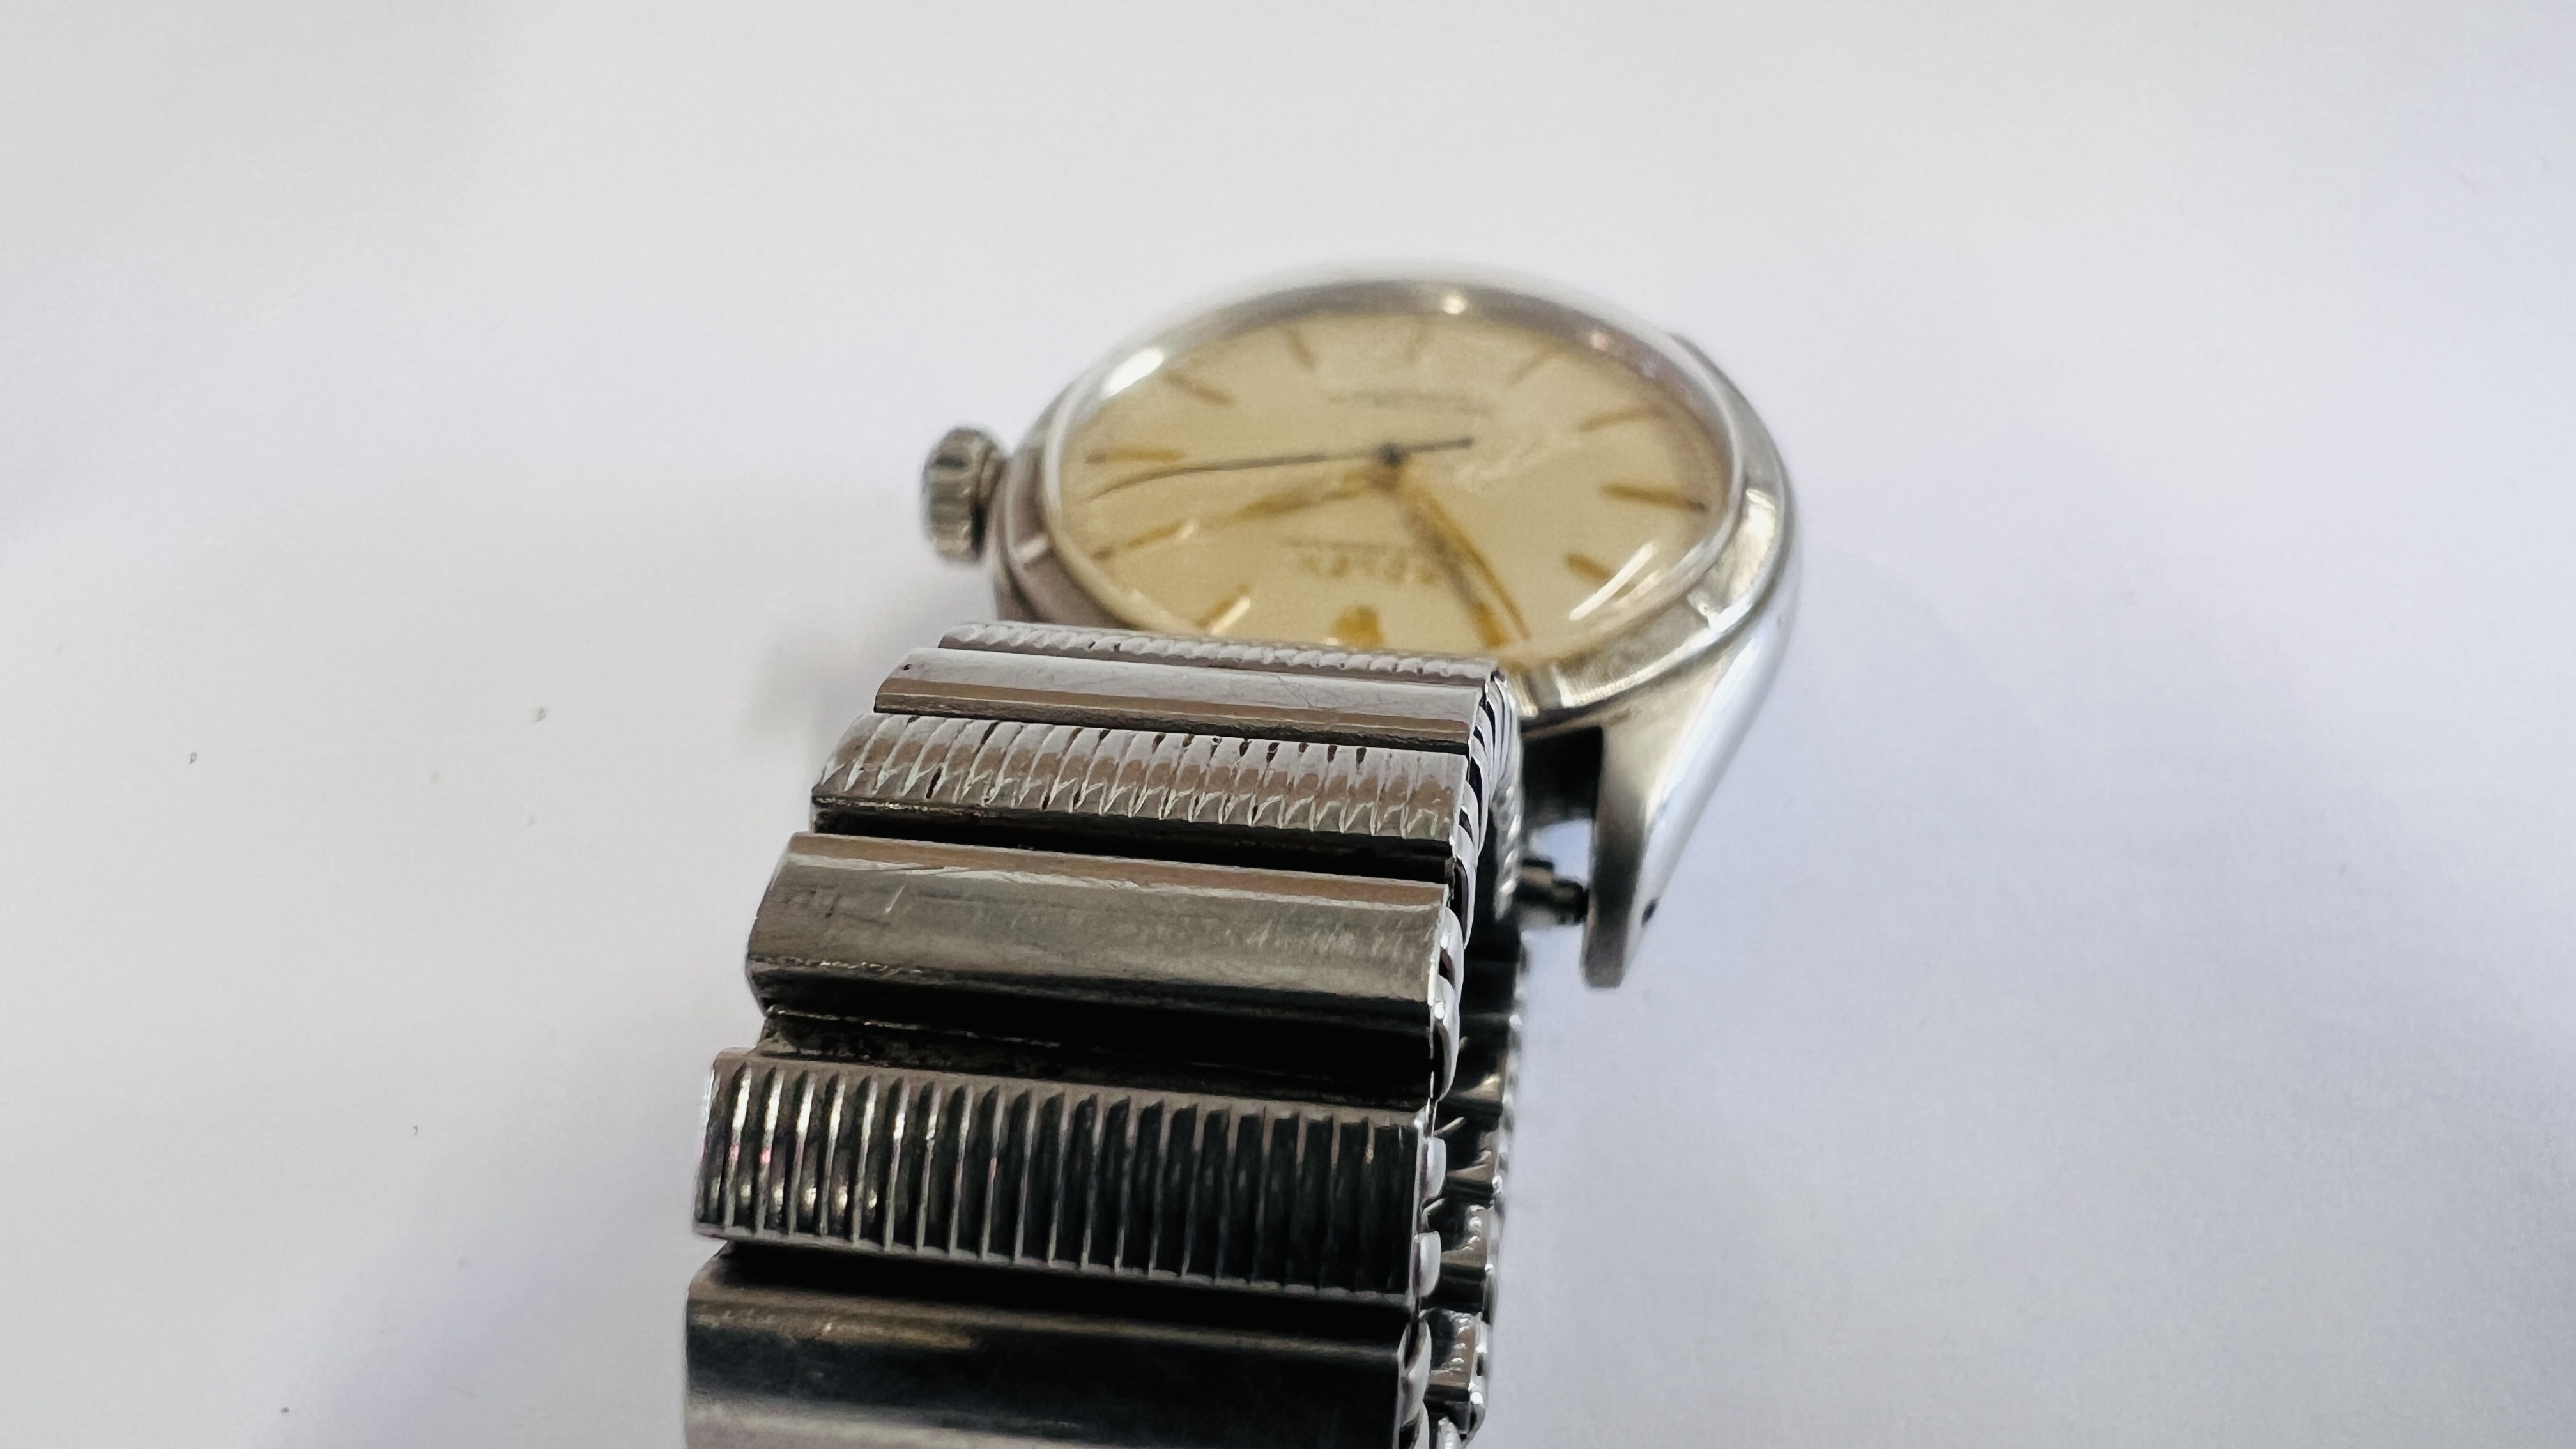 A 1960's ROLEX OYSTER PERPTUAL AUTOMATIC WRIST WATCH ON EXPANDABLE STRAP STAMPED 6085 MODEL F D E - Image 16 of 19